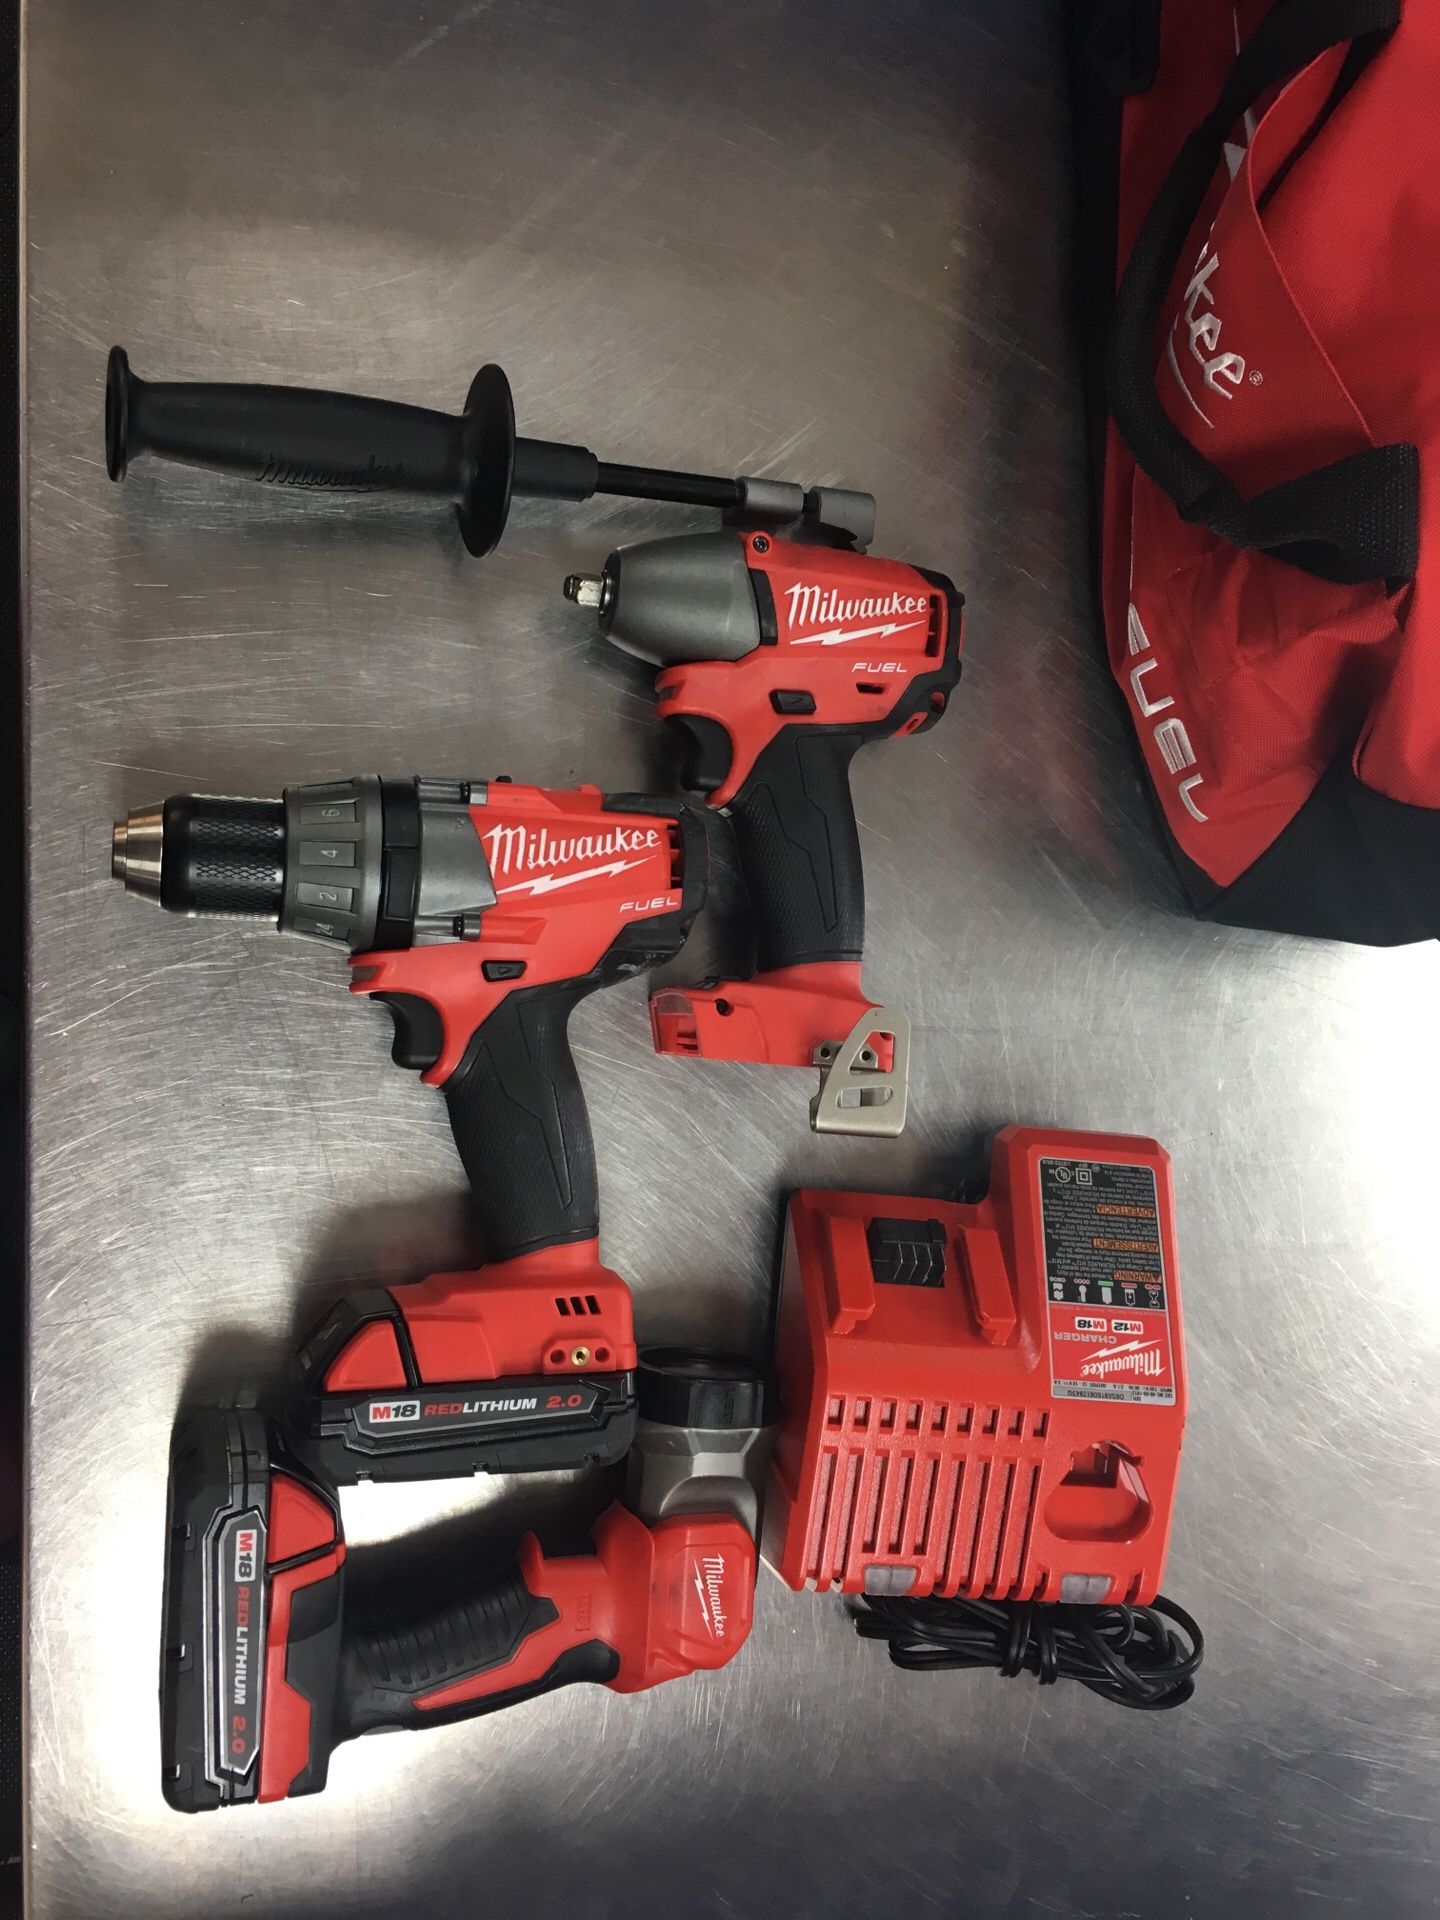 Milwaukee drill/driver, impact wrench and work light set